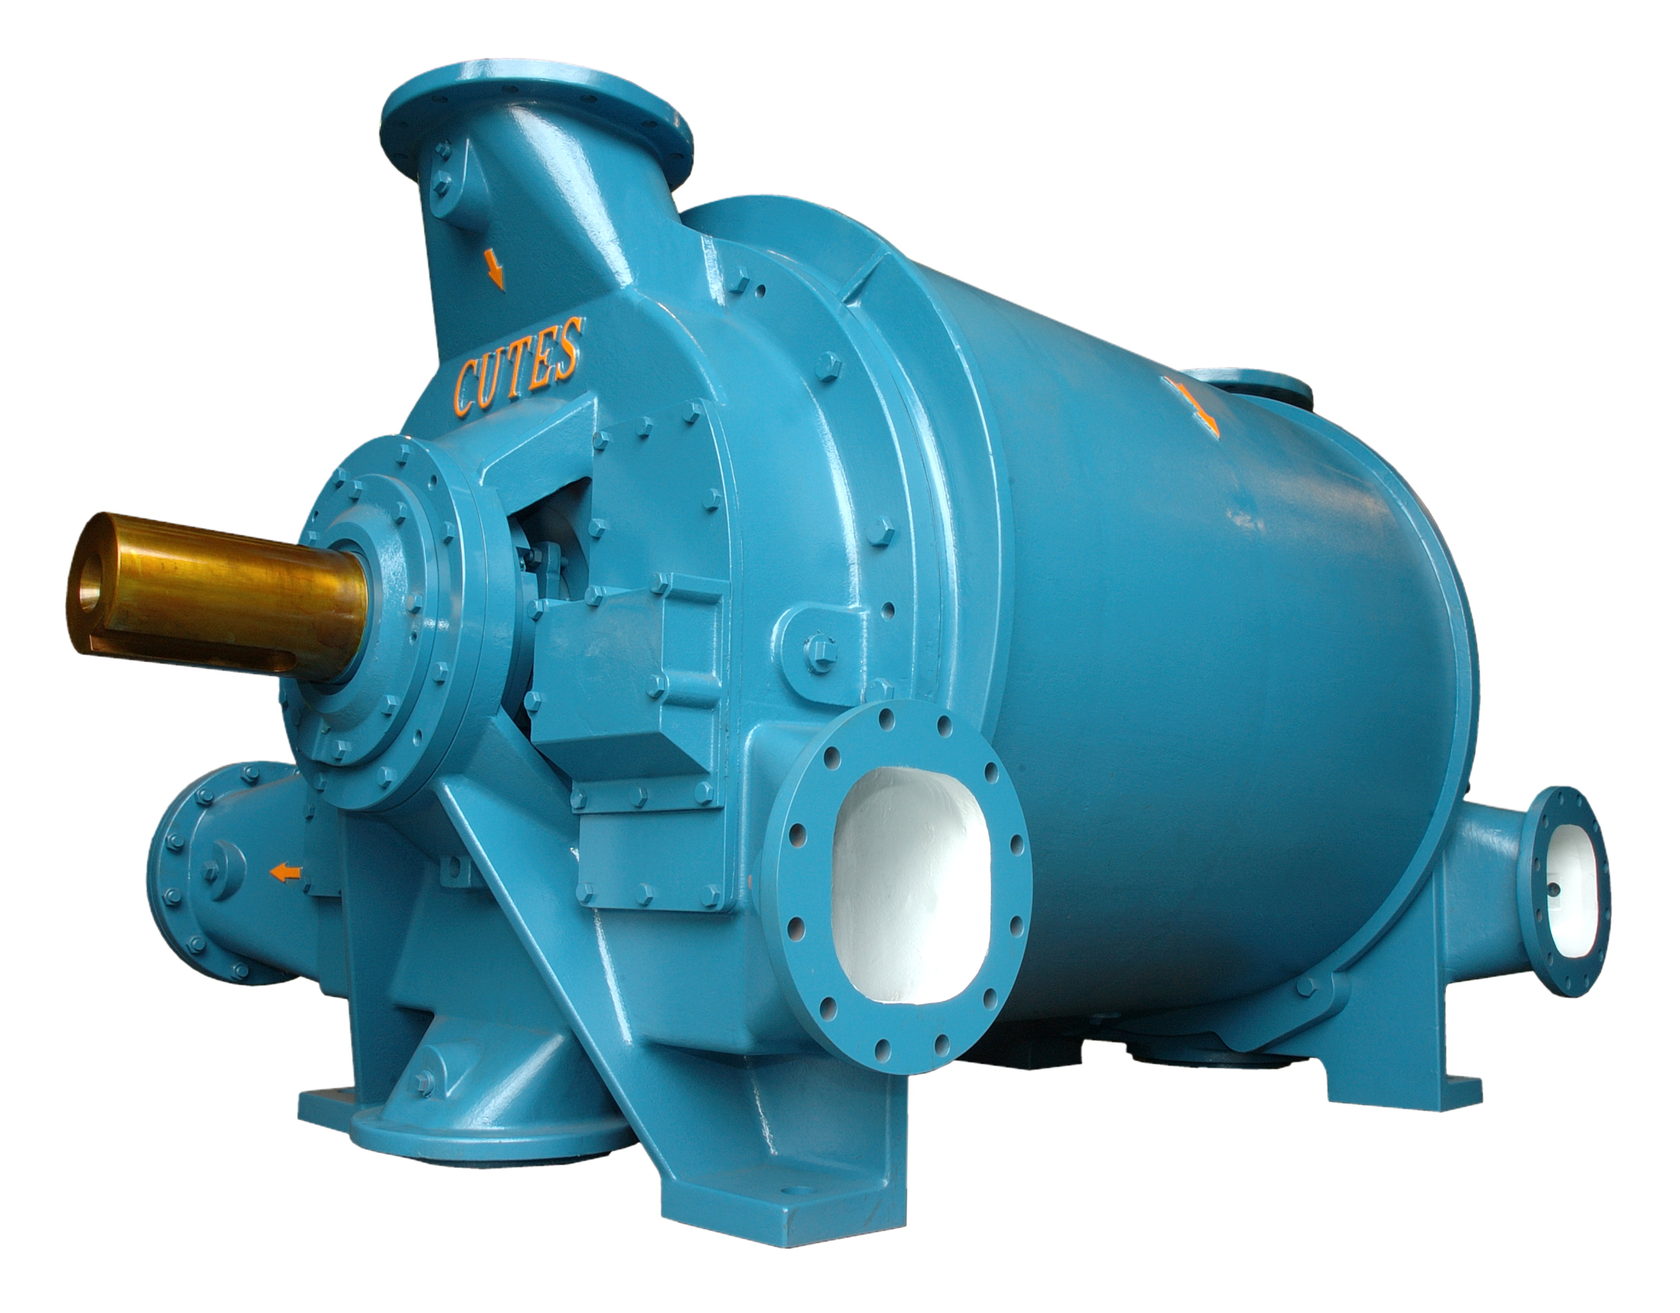 GmbH vacuum pumps and systems